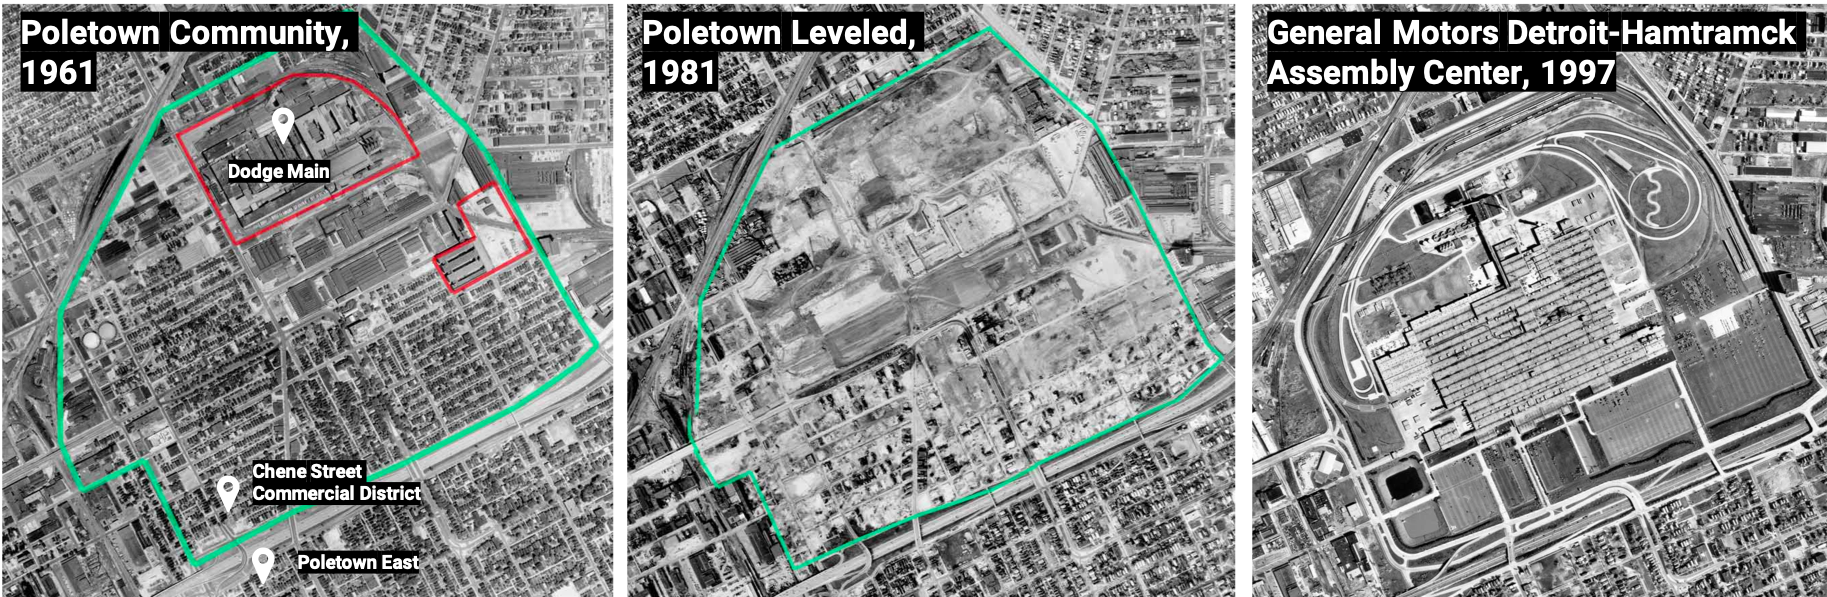 Side by side map comparisons of Poletown 1961, 1981, 1997